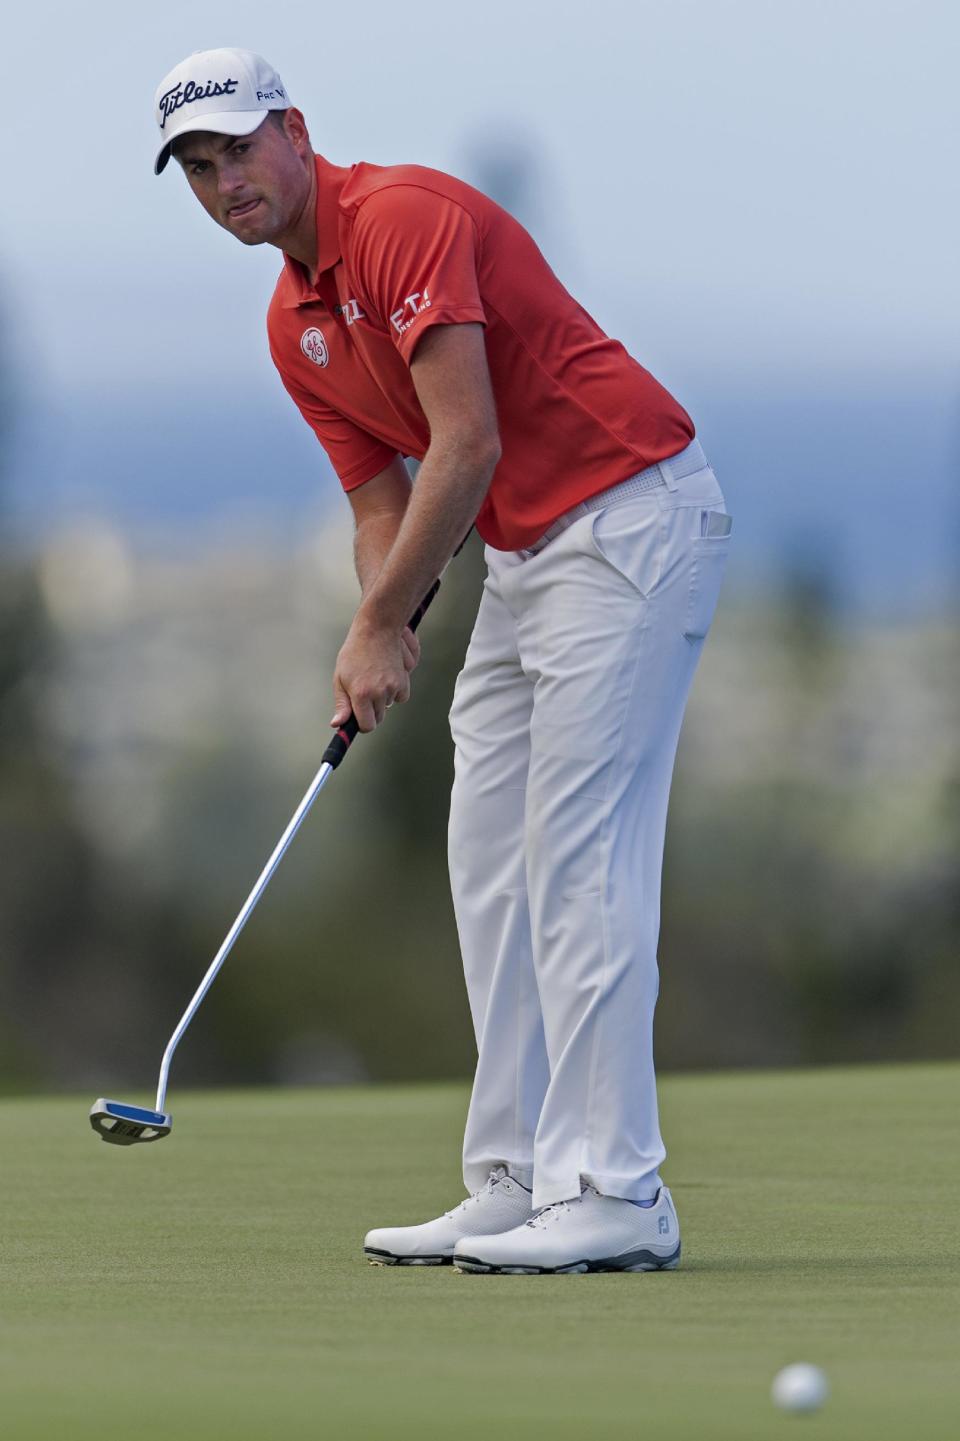 Webb Simpson follows his putt on the 10th green during the second round of the Tournament of Champions golf tournament, Saturday, Jan. 4, 2014, in Kapalua, Hawaii. (AP Photo/Marco Garcia)